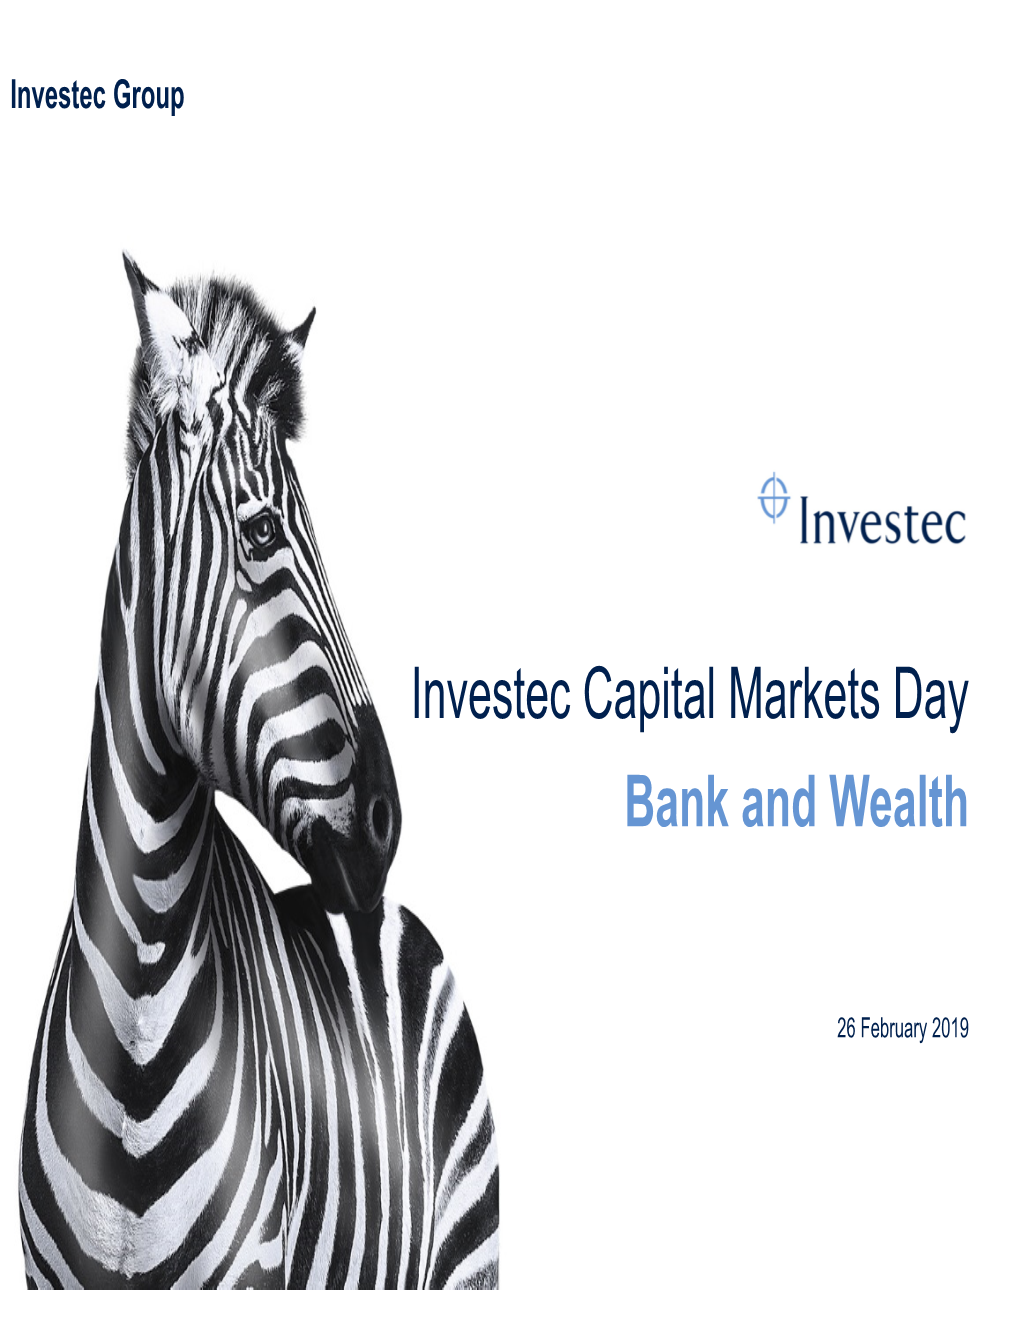 Investec Capital Markets Day Bank and Wealth